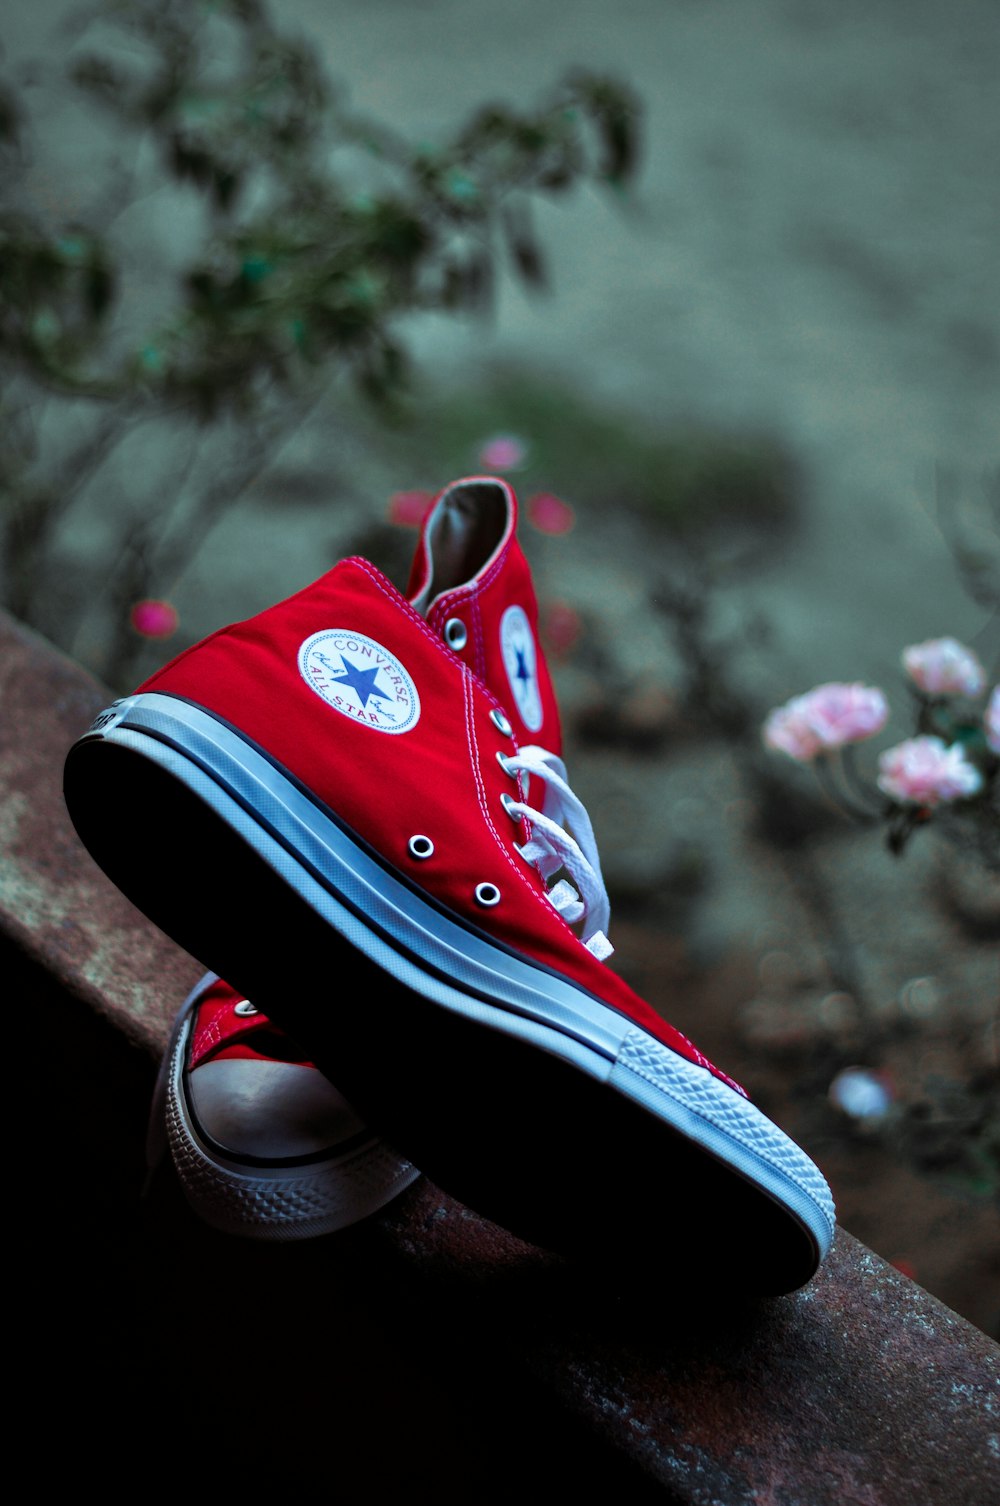 Red and black converse all star high top sneakers photo – Free Sneakers  Image on Unsplash